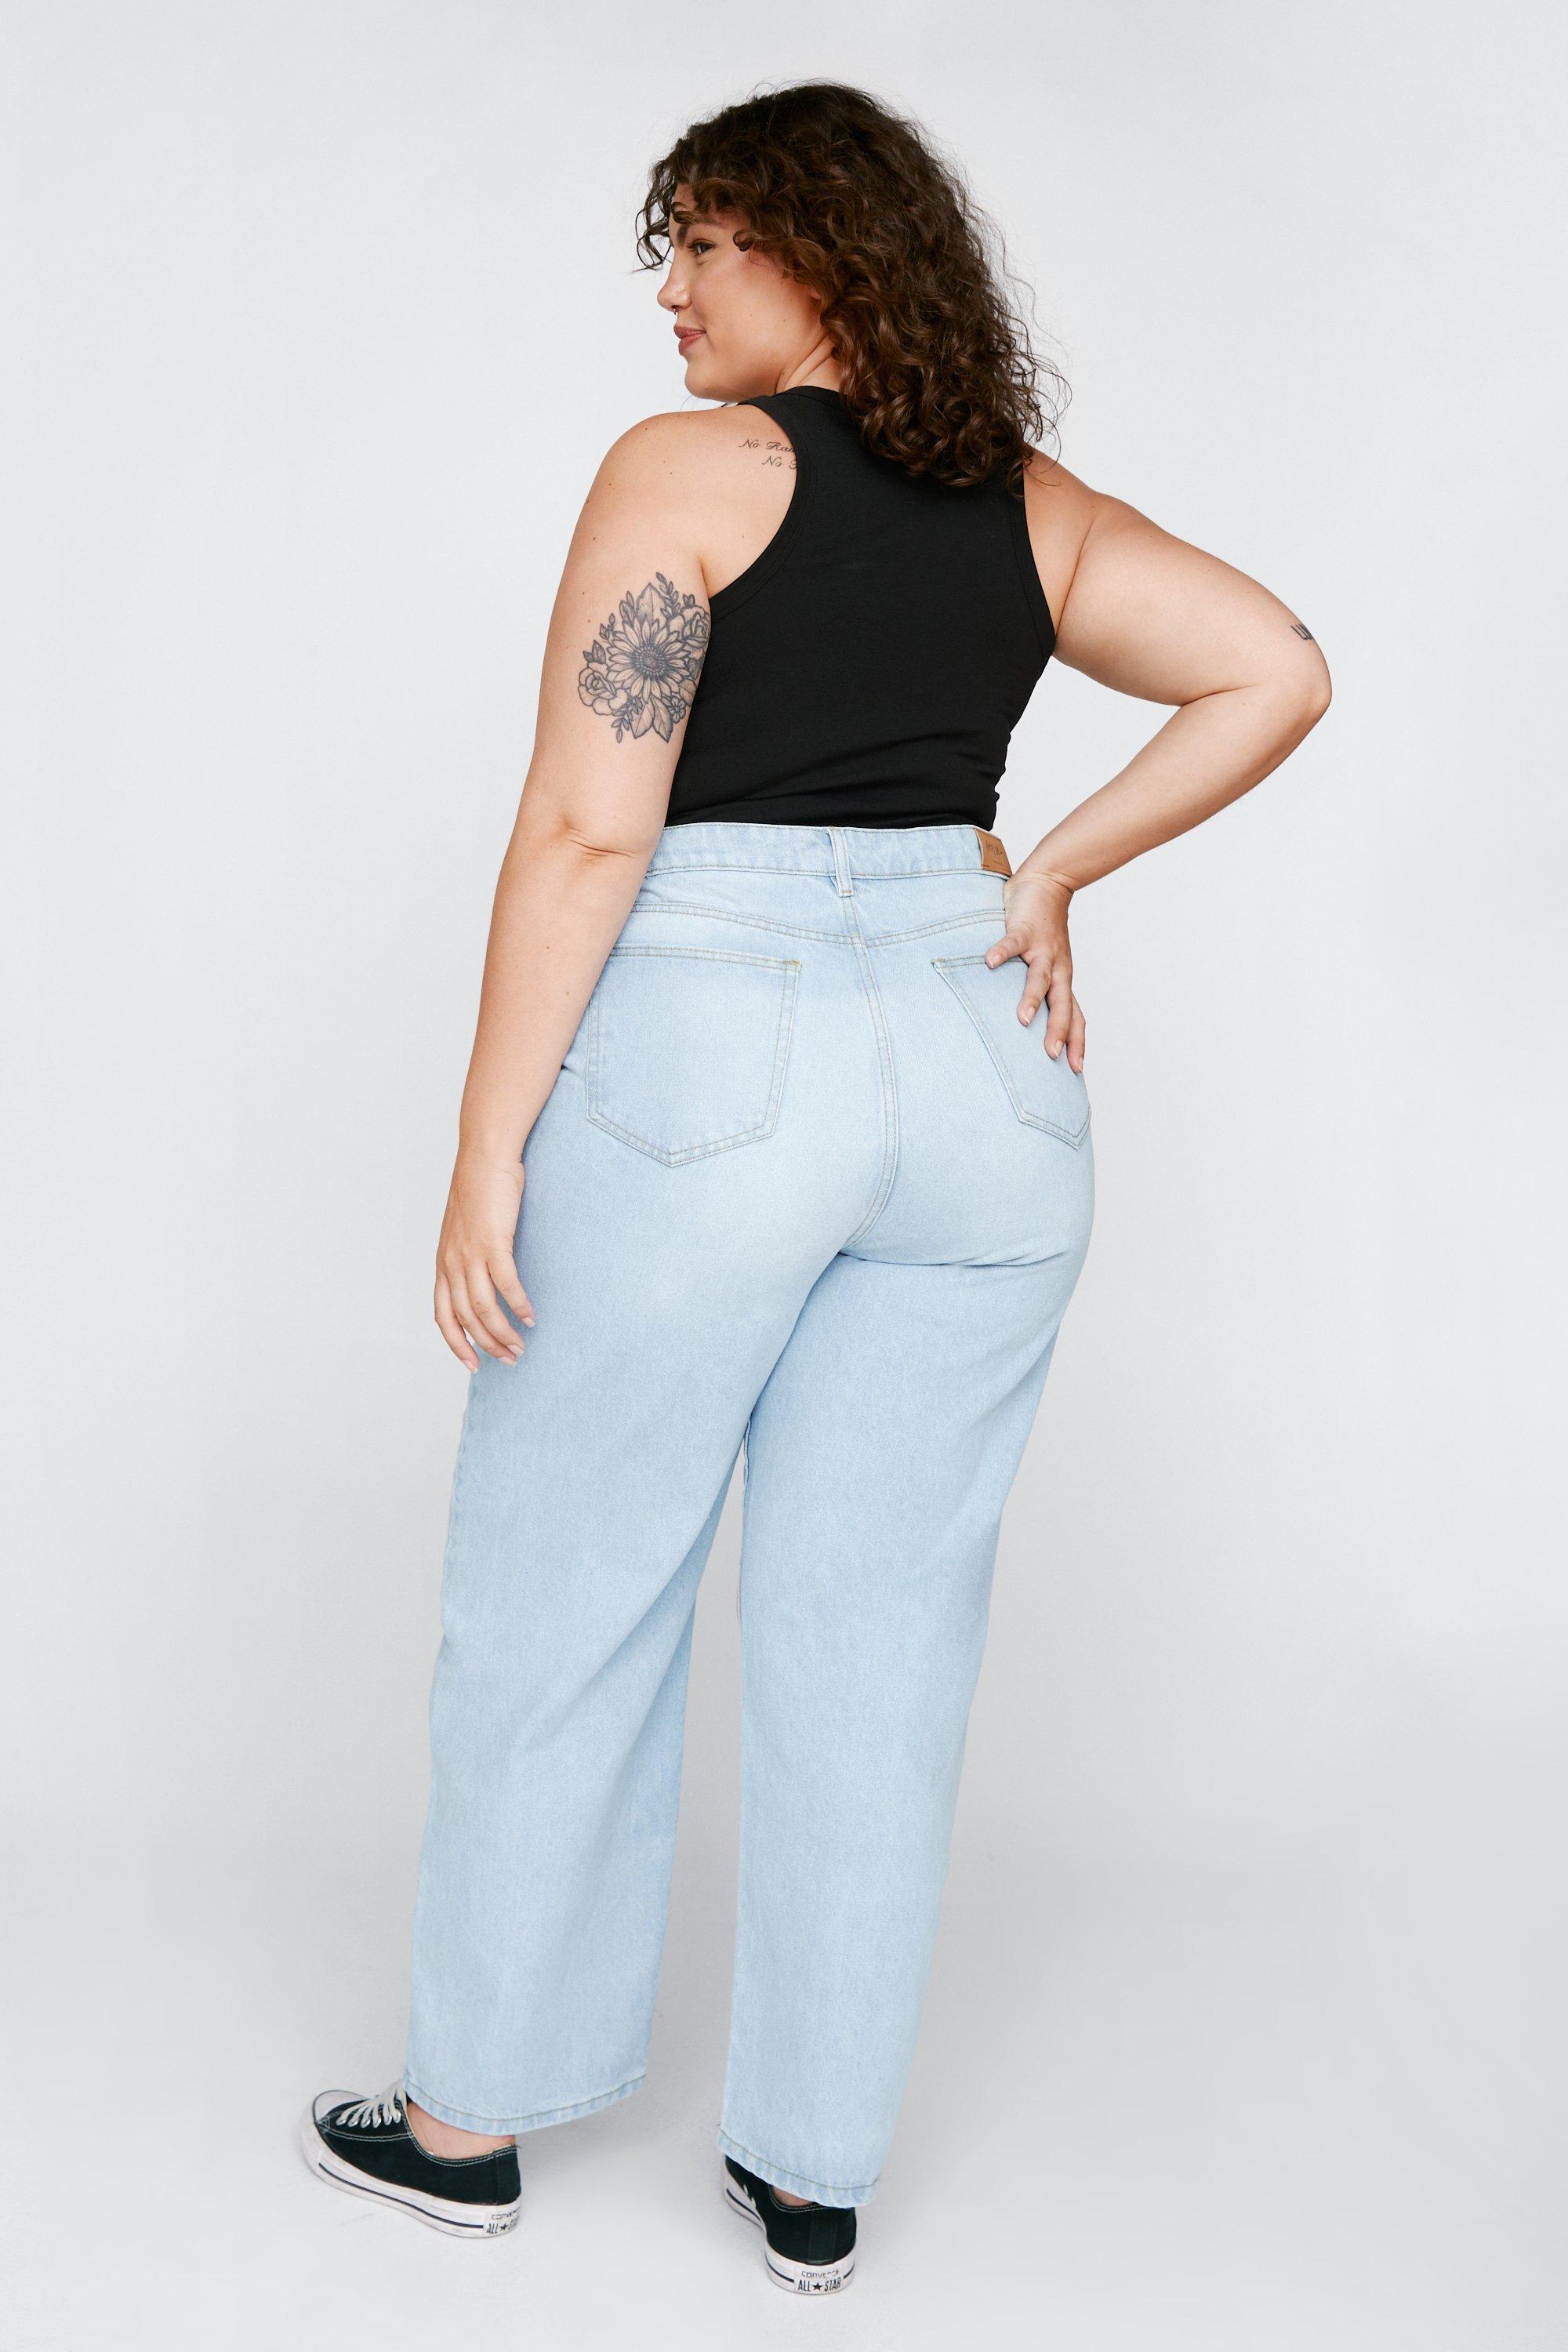 Trendy Plus Size Women's High-Waisted Mom Jeans